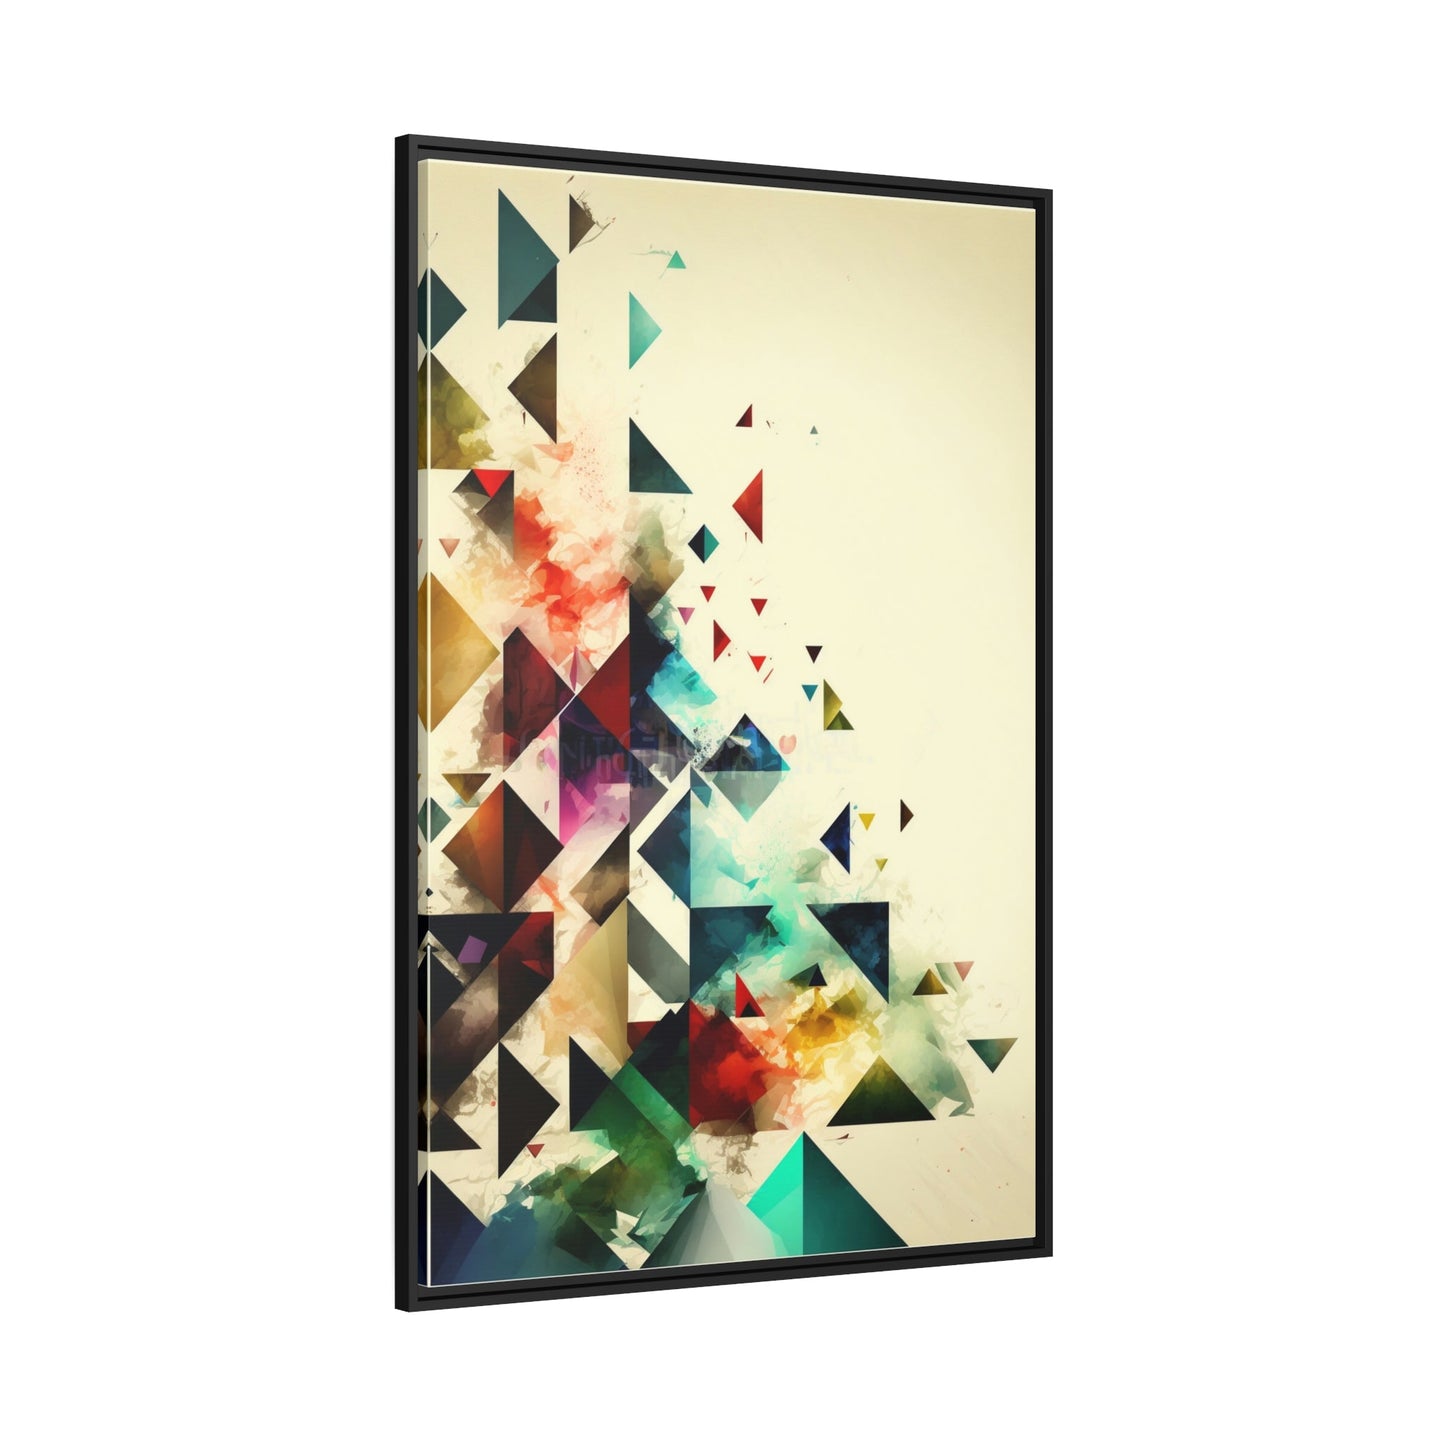 Illusions of Reality: Canvas & Poster Print of Geometric Abstraction